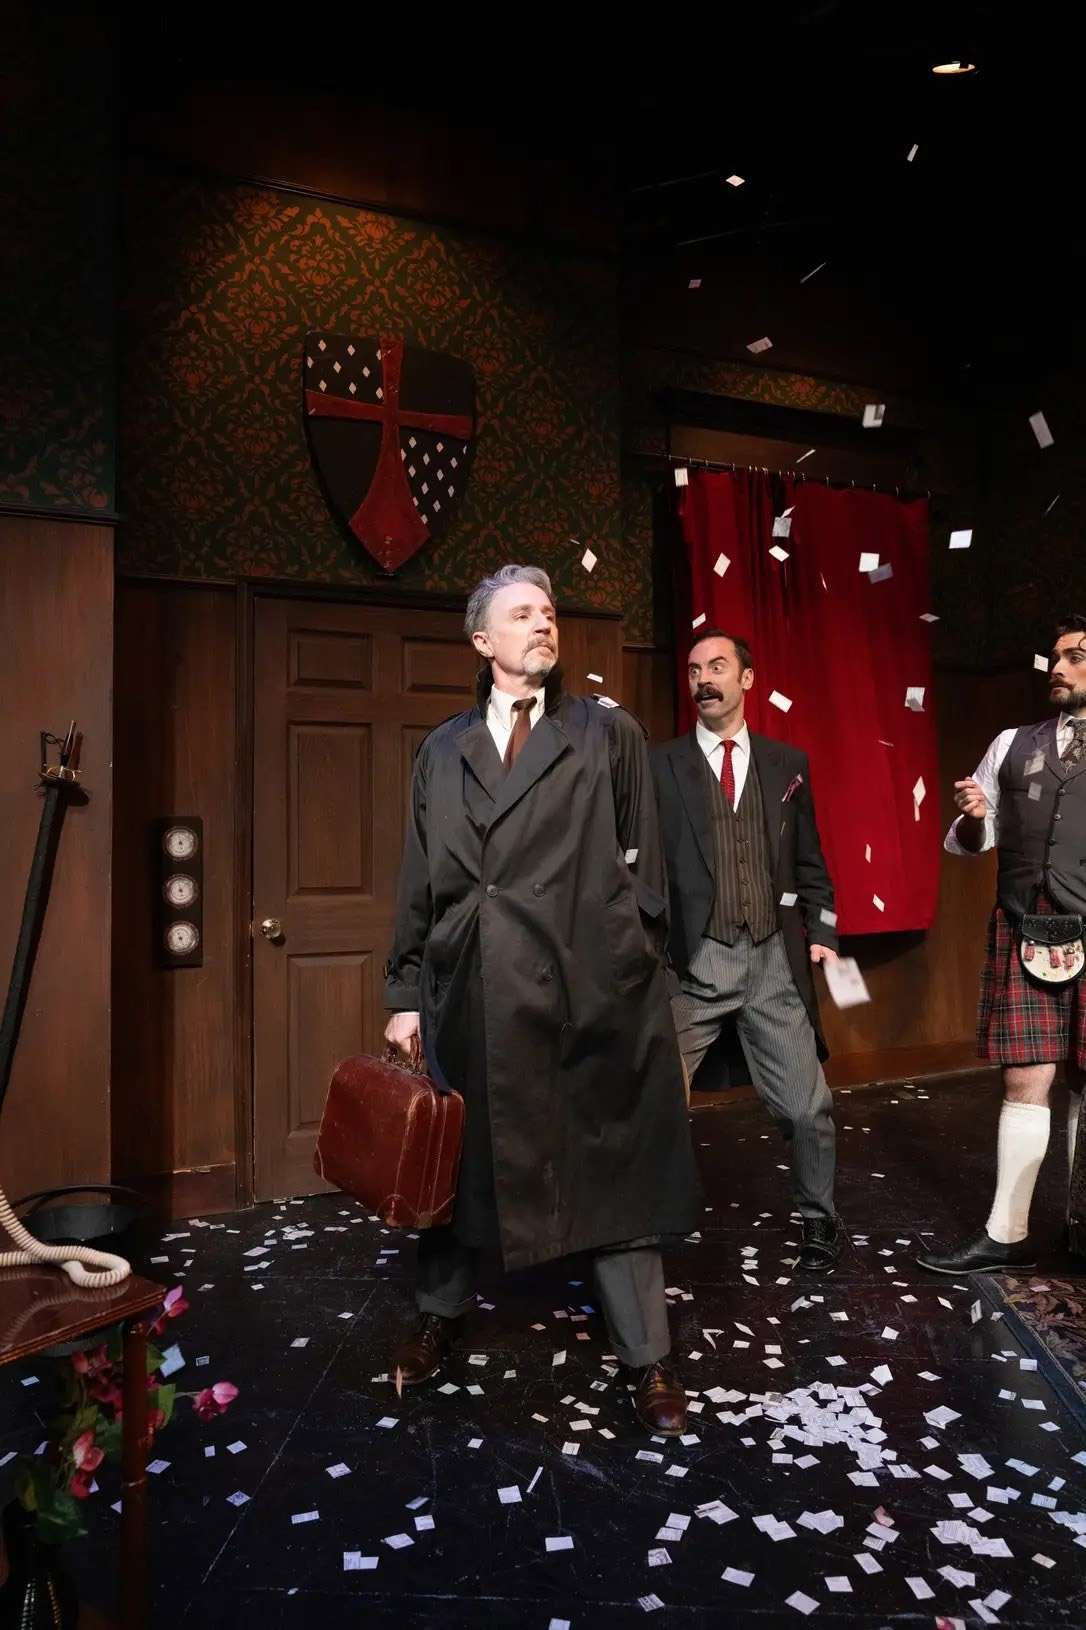 As Inspector Carter, with Nick Ferrucci as Perkins and Cody Gerszewski as Thomas Colleymoore in THE PLAY THAT GOES WRONG at Sierra Repertory Theatre. Photo by Brooke Battle.